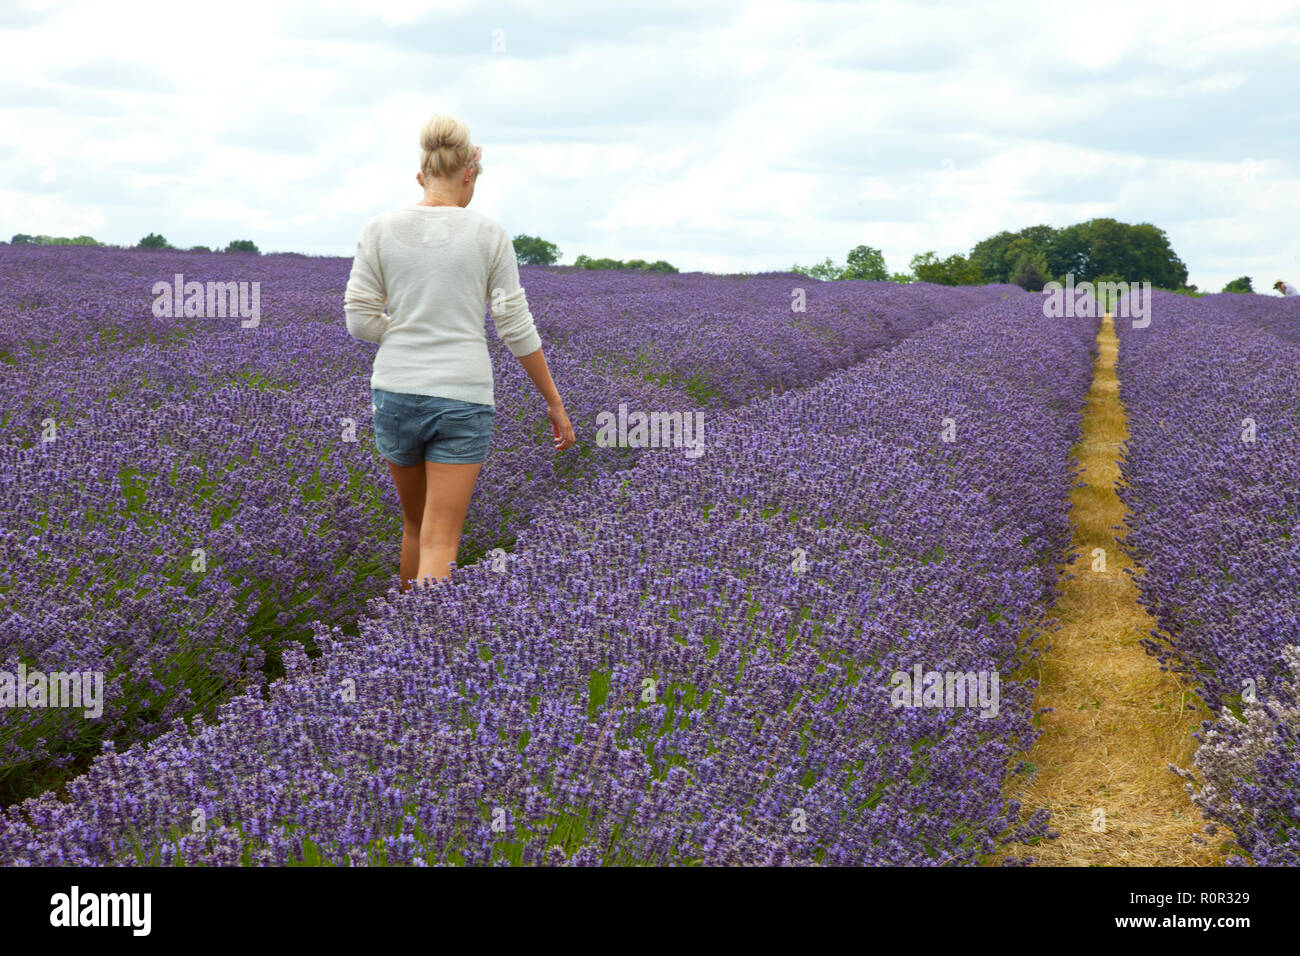 Girl with blond hair and denim shorts walking through a Lavender field Stock Photo